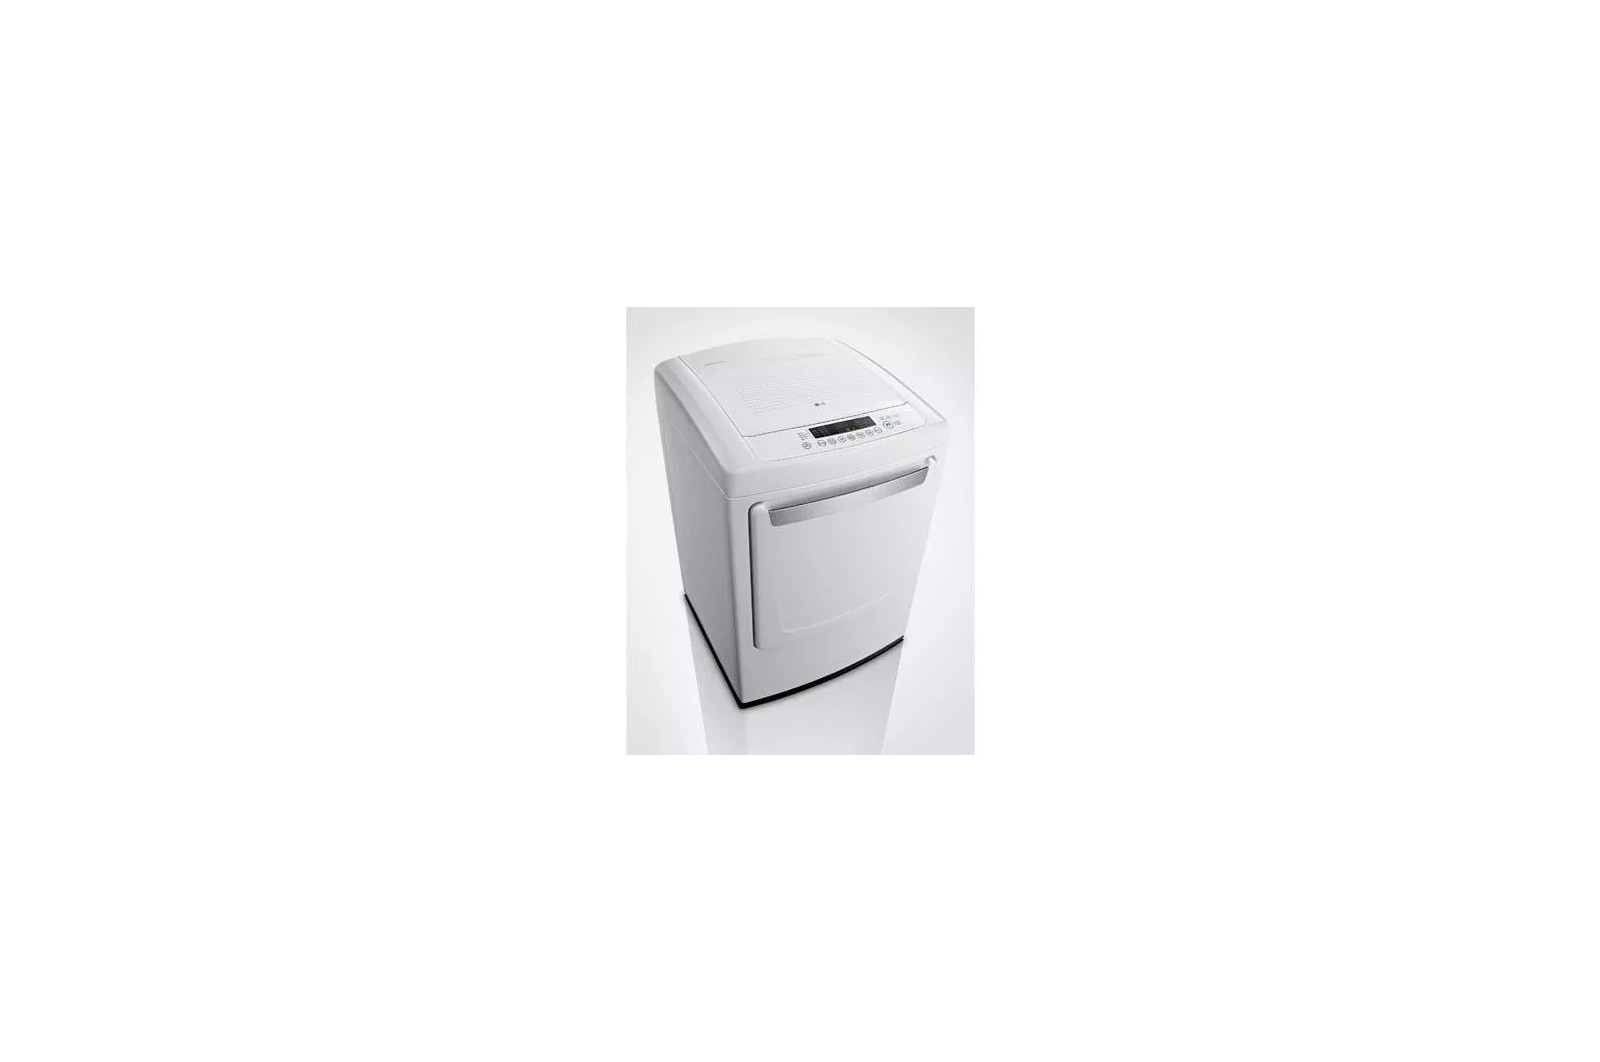 LG DLG2102W 7.3 Cu.Ft. Ultra-Large Capacity Dryer With Led Dis